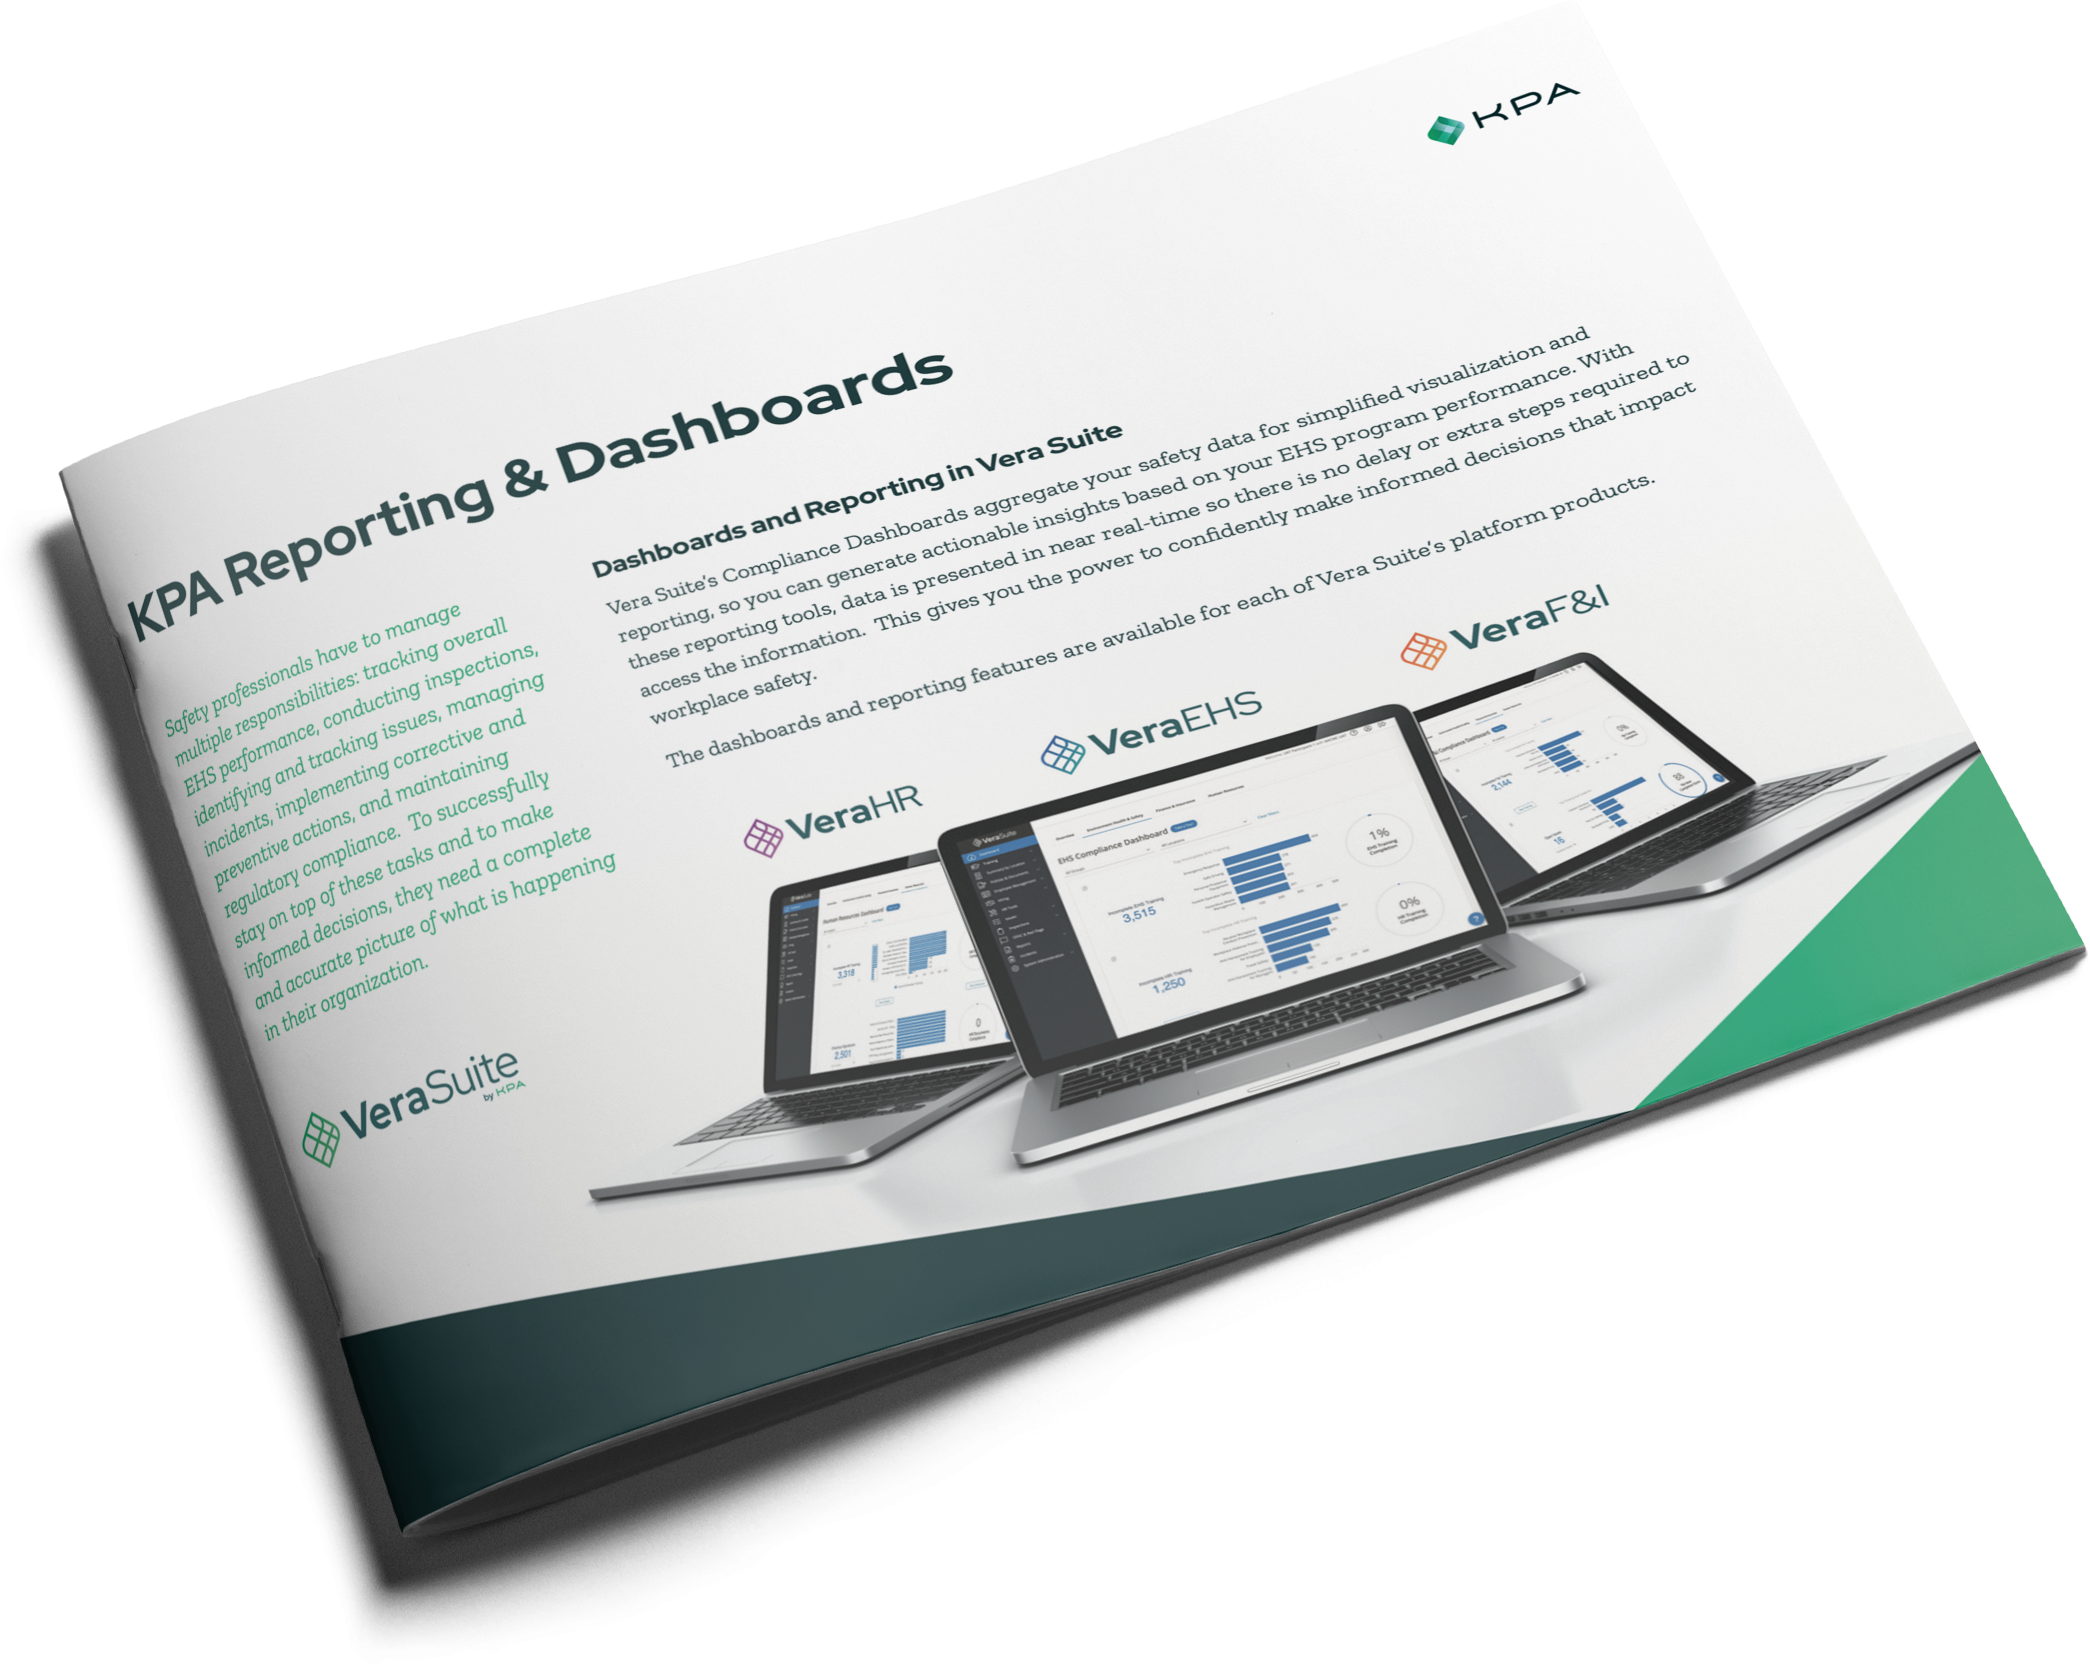 Reporting & Dashboards Solution Brief